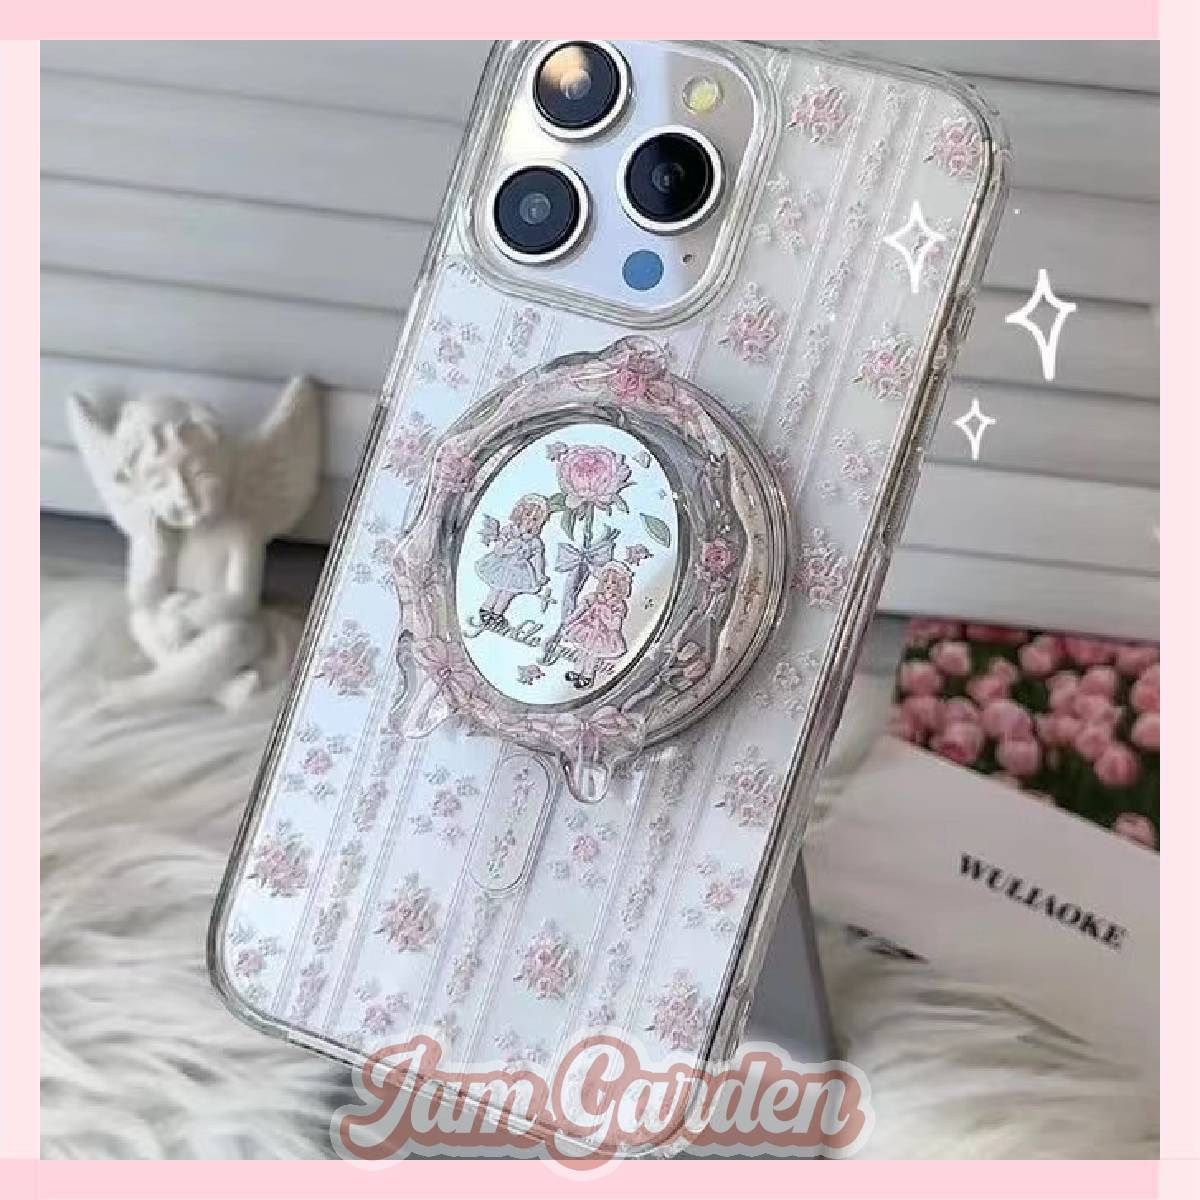 Girly lace floral phone case